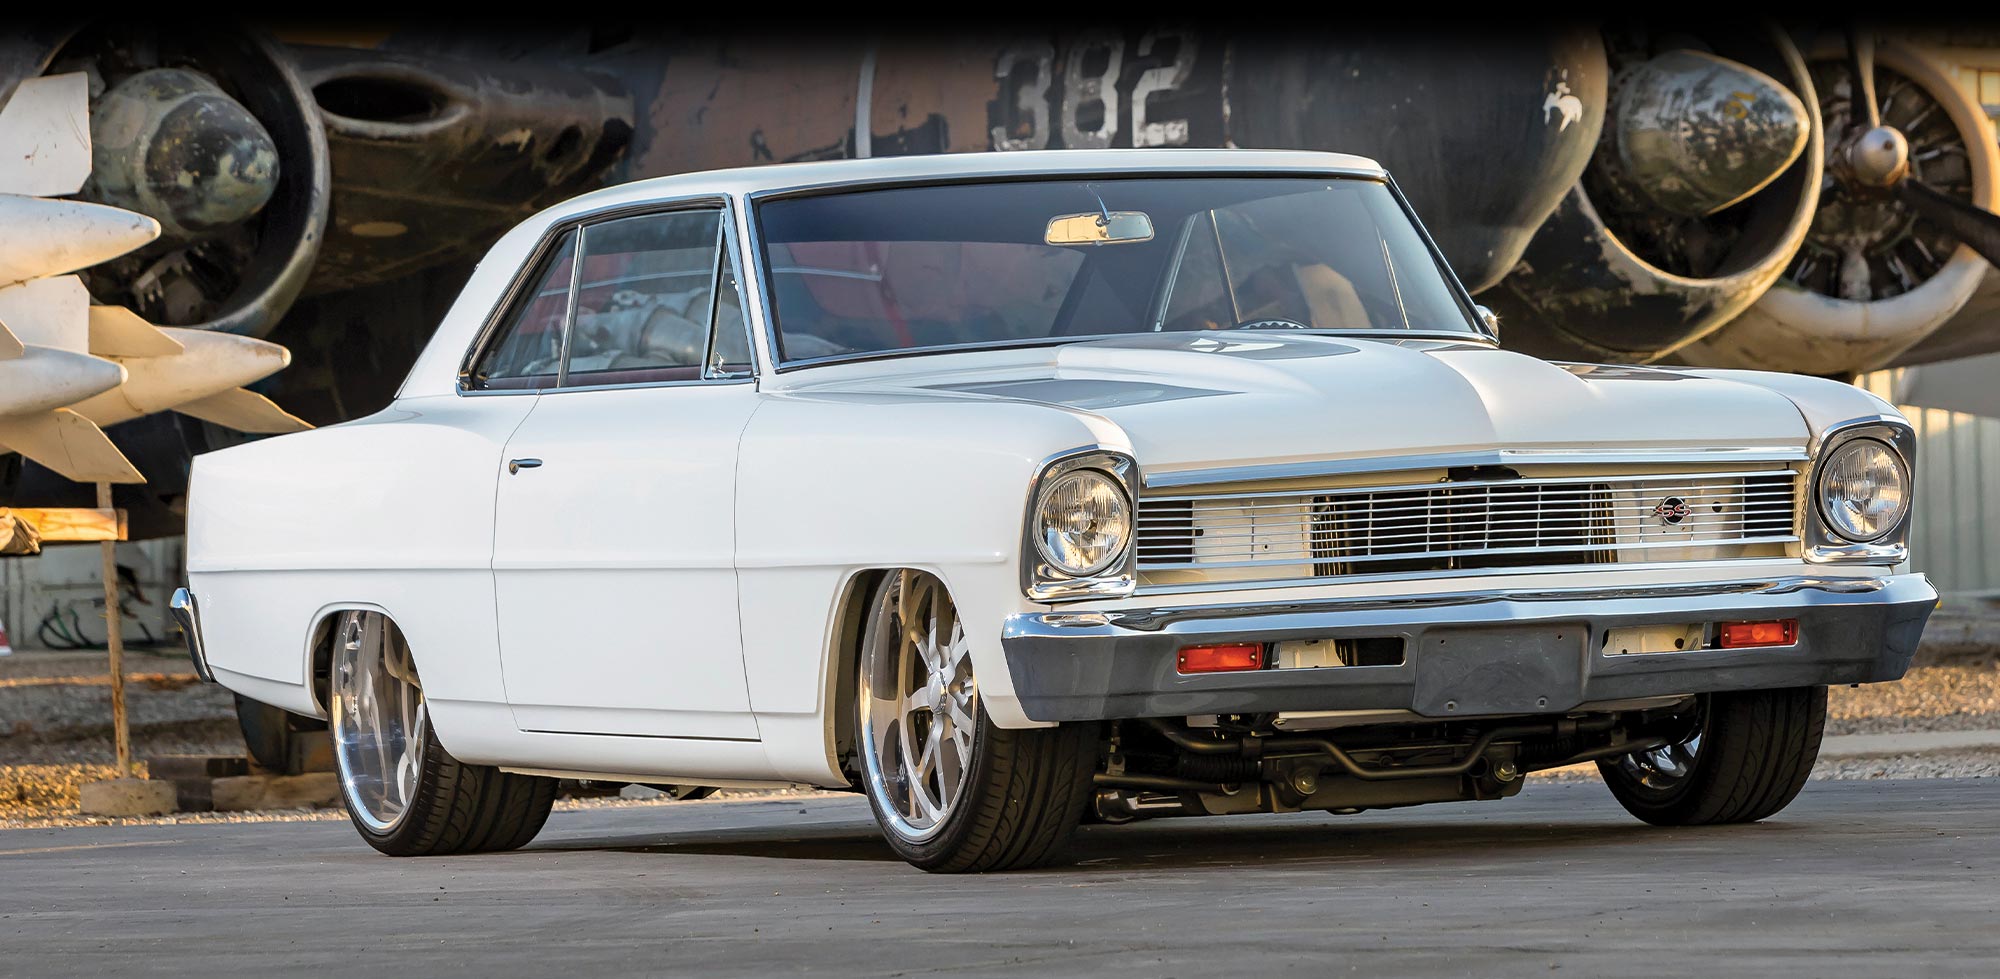 quarter passenger side view of Christian Peich’s white ’66 Chevy Nova SS parked on the tarmac of an old aircraft hanger